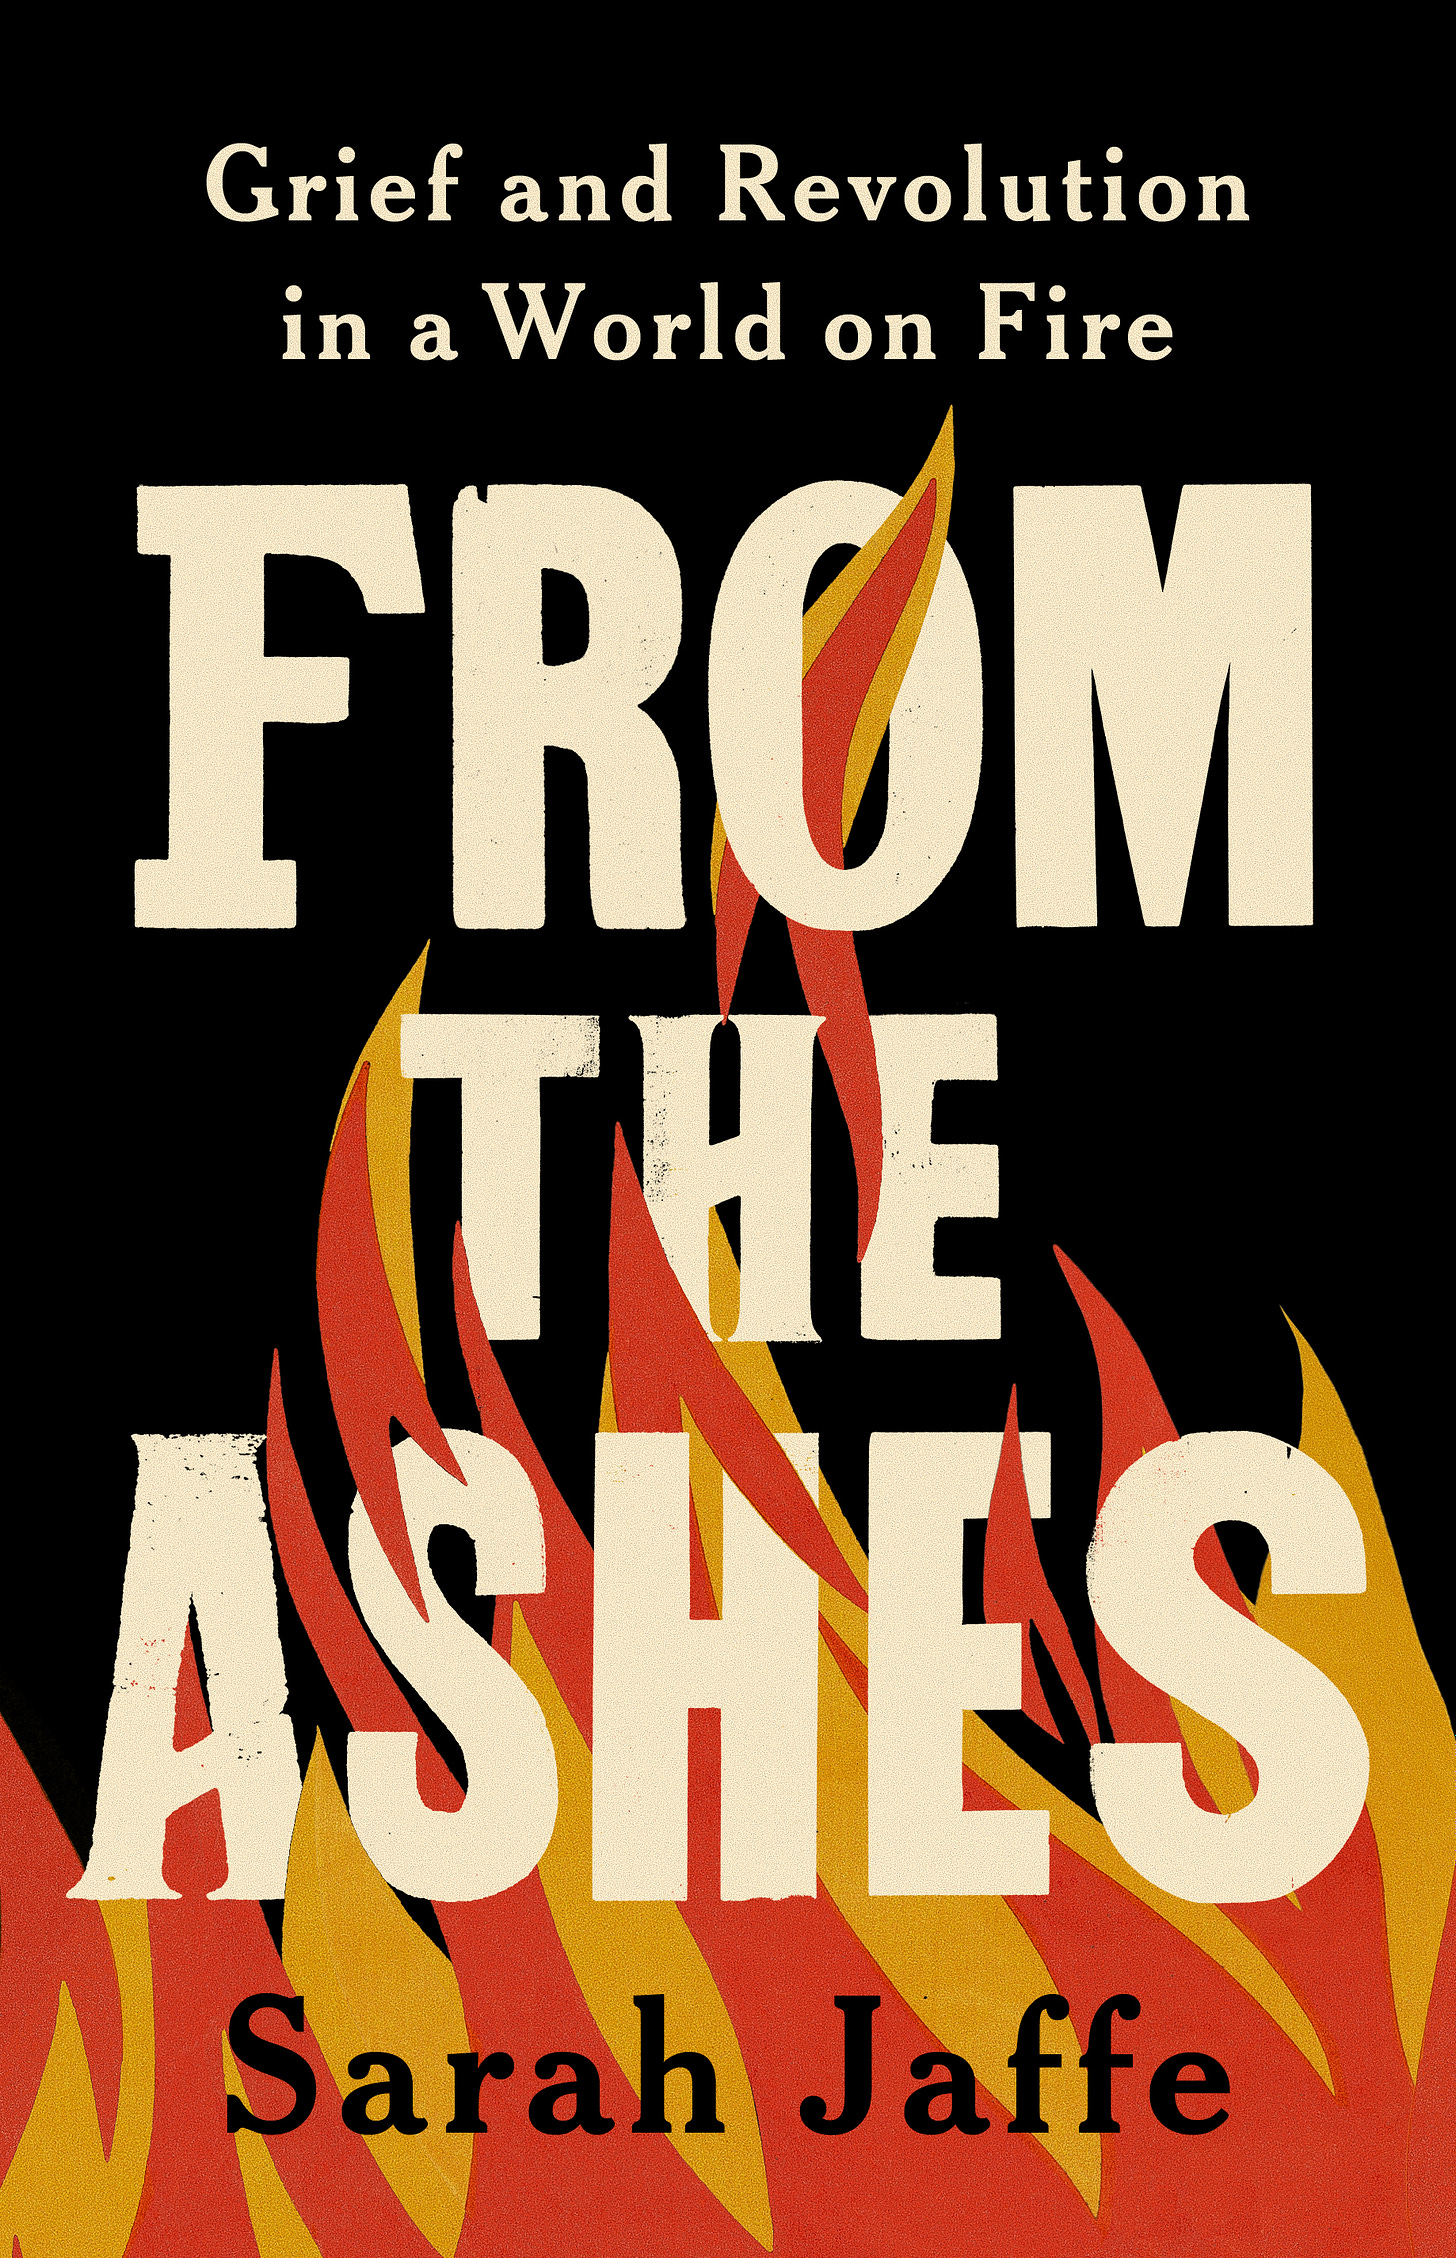 Book cover: on a black background, the words FROM THE ASHES with flames twining through them, and the subtitle Grief and Revolution in a World on Fire